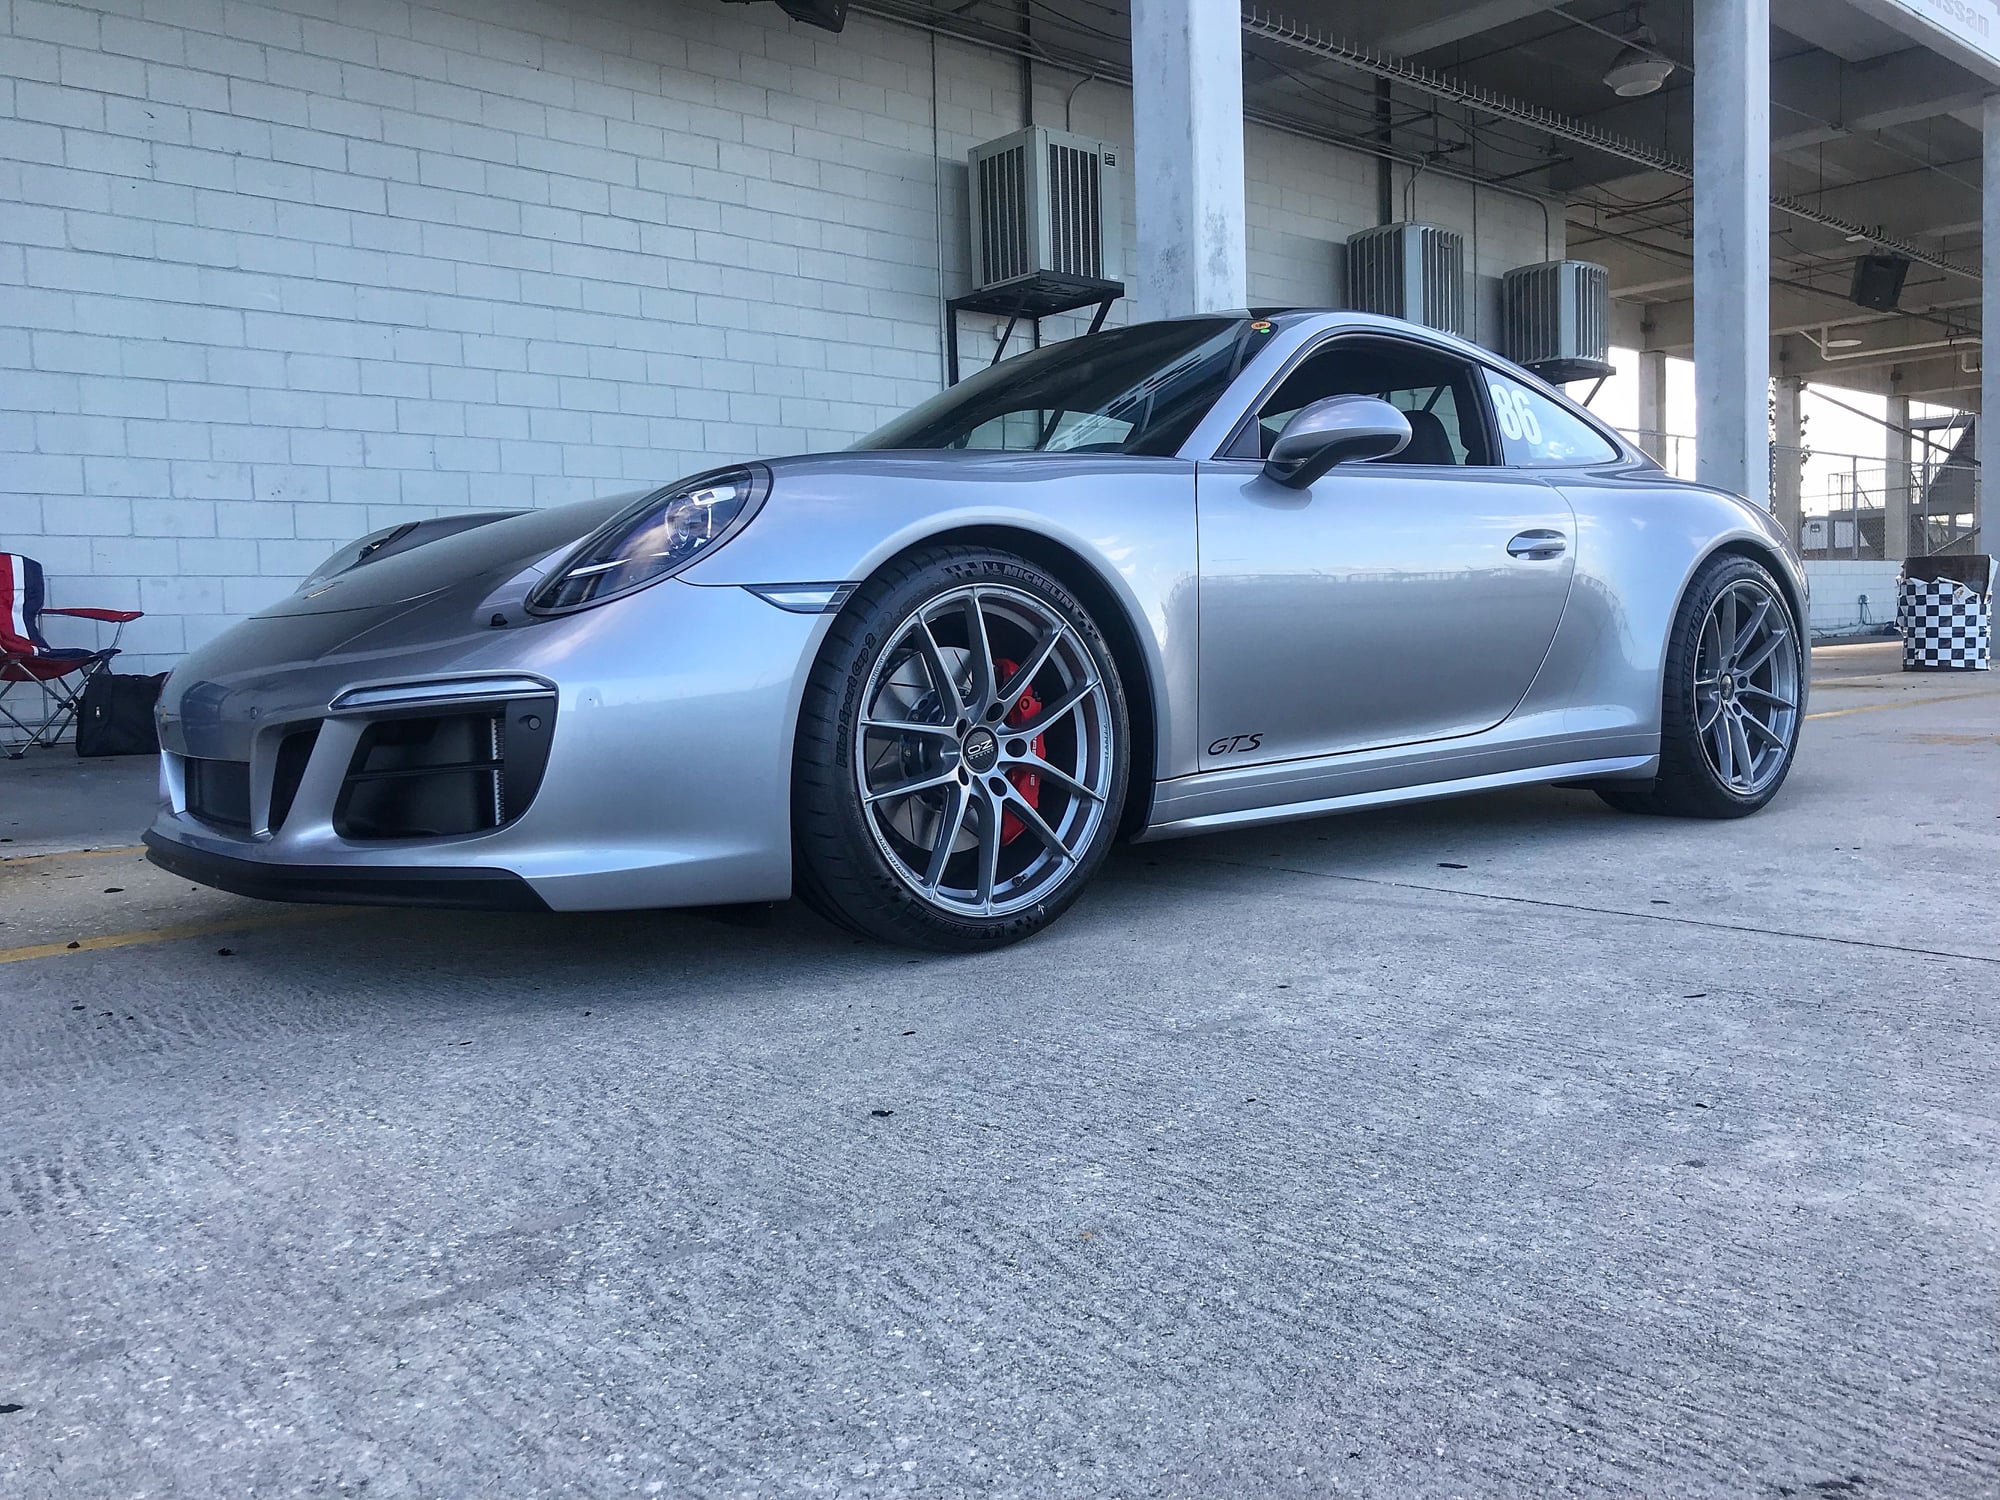 Wheels and Tires/Axles - OZ 20" Leggier Wheels w/ Michelin Sport Cup 2 - Used - 2013 to 2019 Porsche 911 - Tampa, FL 34655, United States